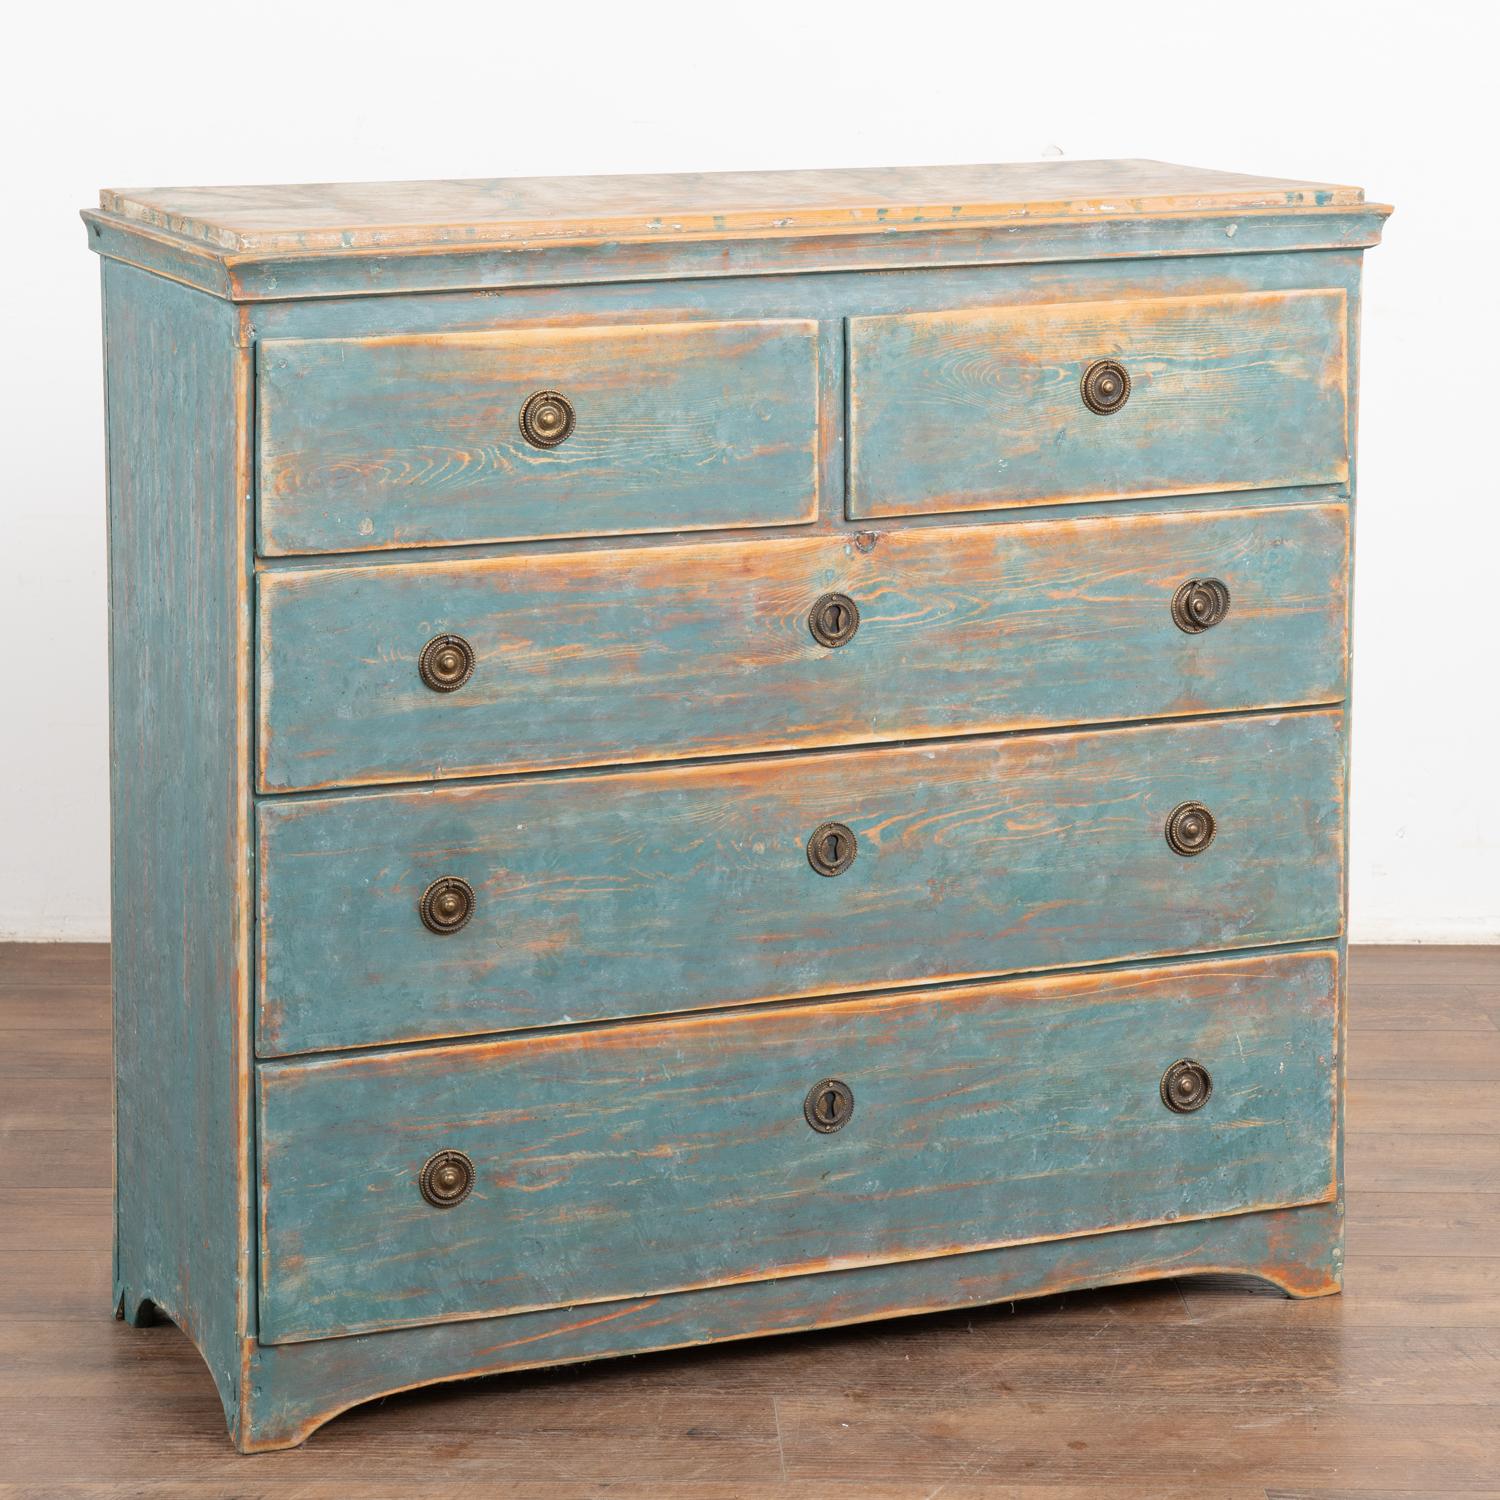 Original blue painted chest of drawers with warm, aged patina. The paint has been worn down through generations of use, revealing the natural pine below.
Note photos of top with traditional faux marble painted finish; much of pine shows along the